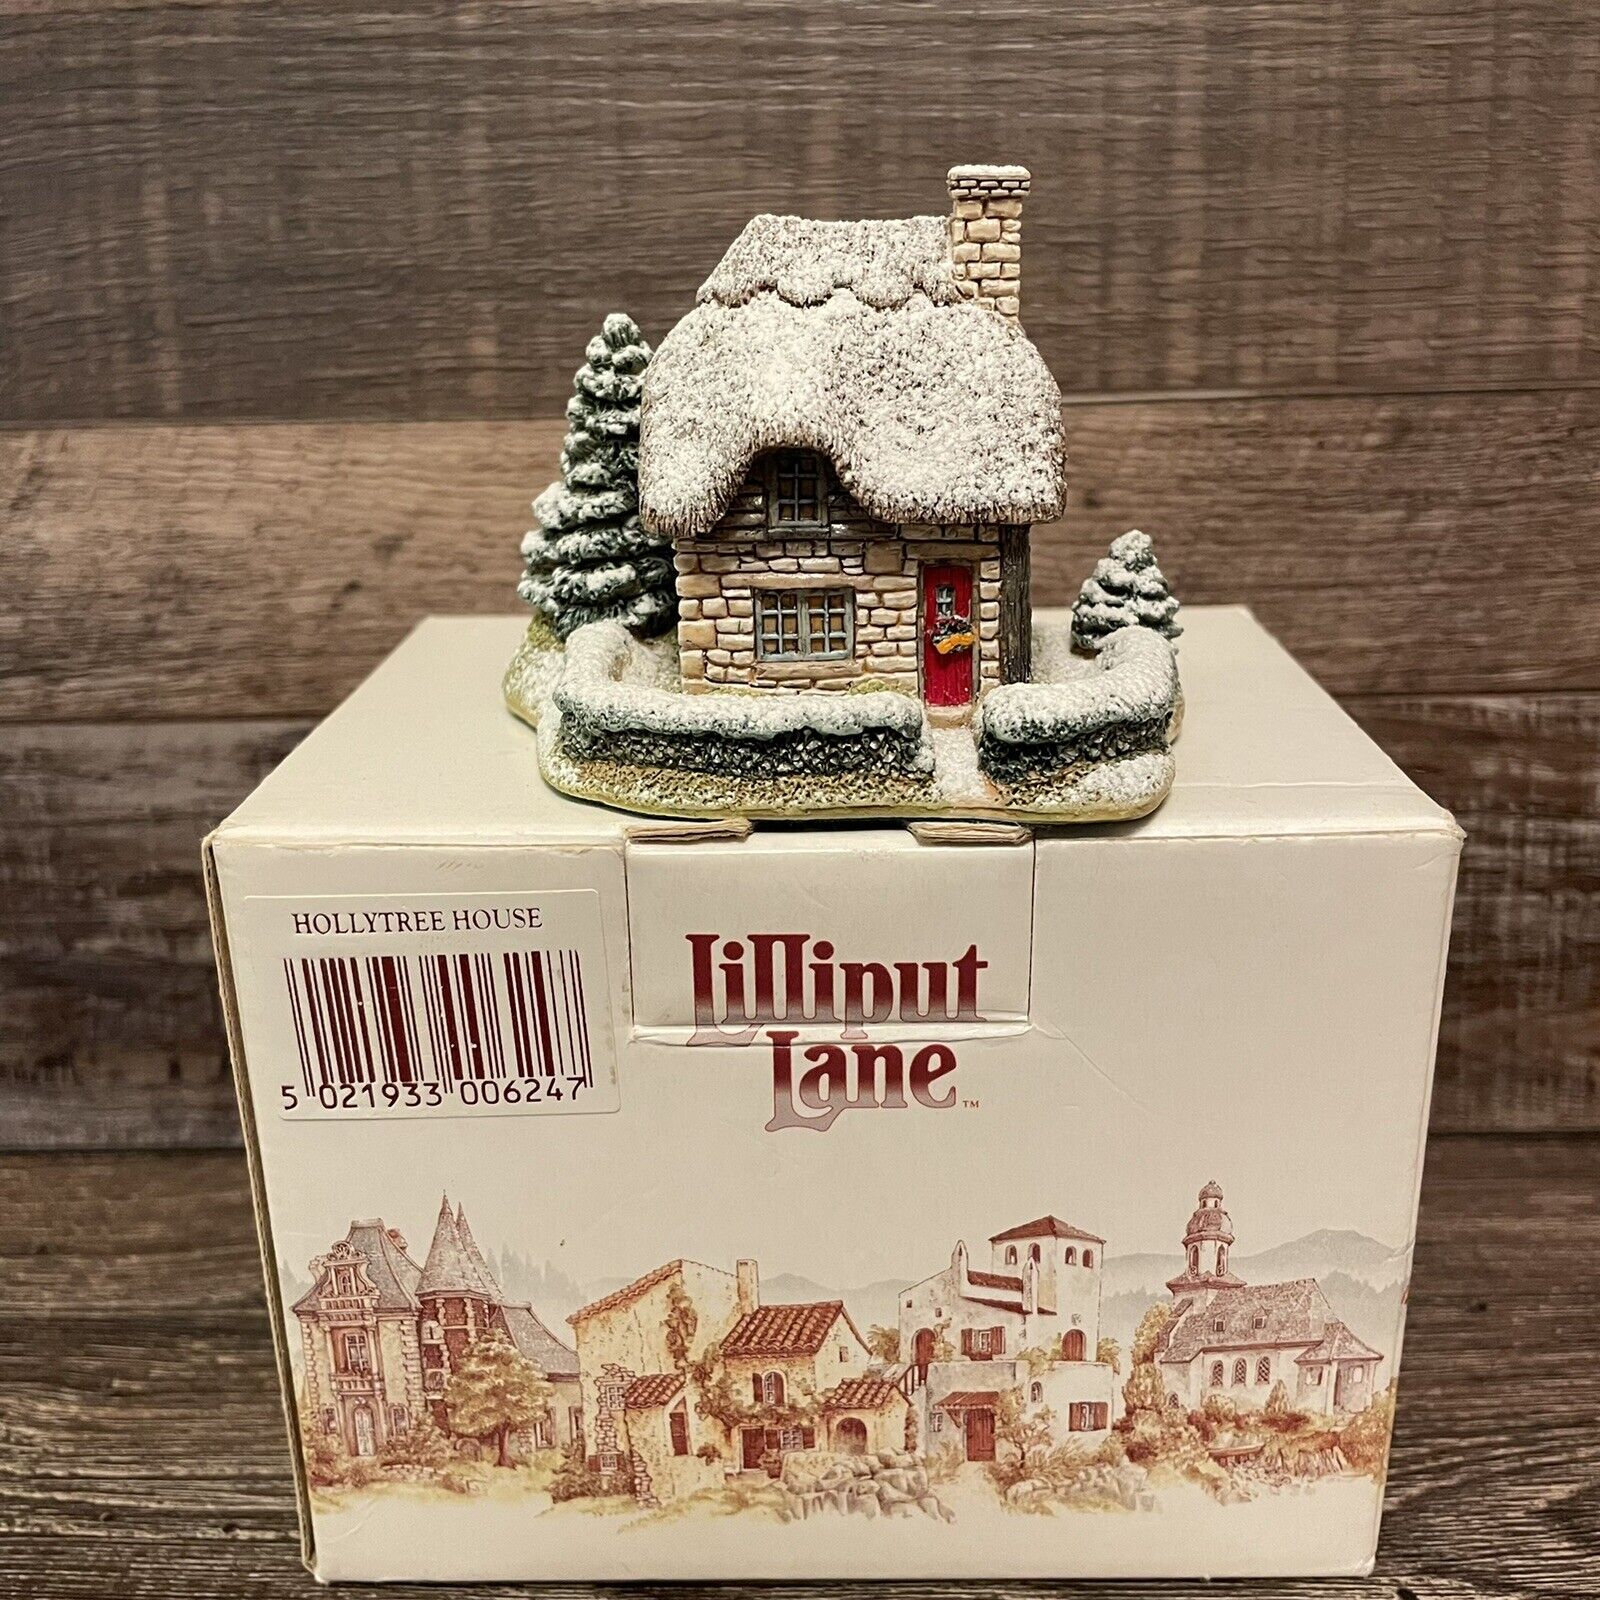 Lilliput Lane Hollytree House Christmas Collection Ornament 1992 With Box